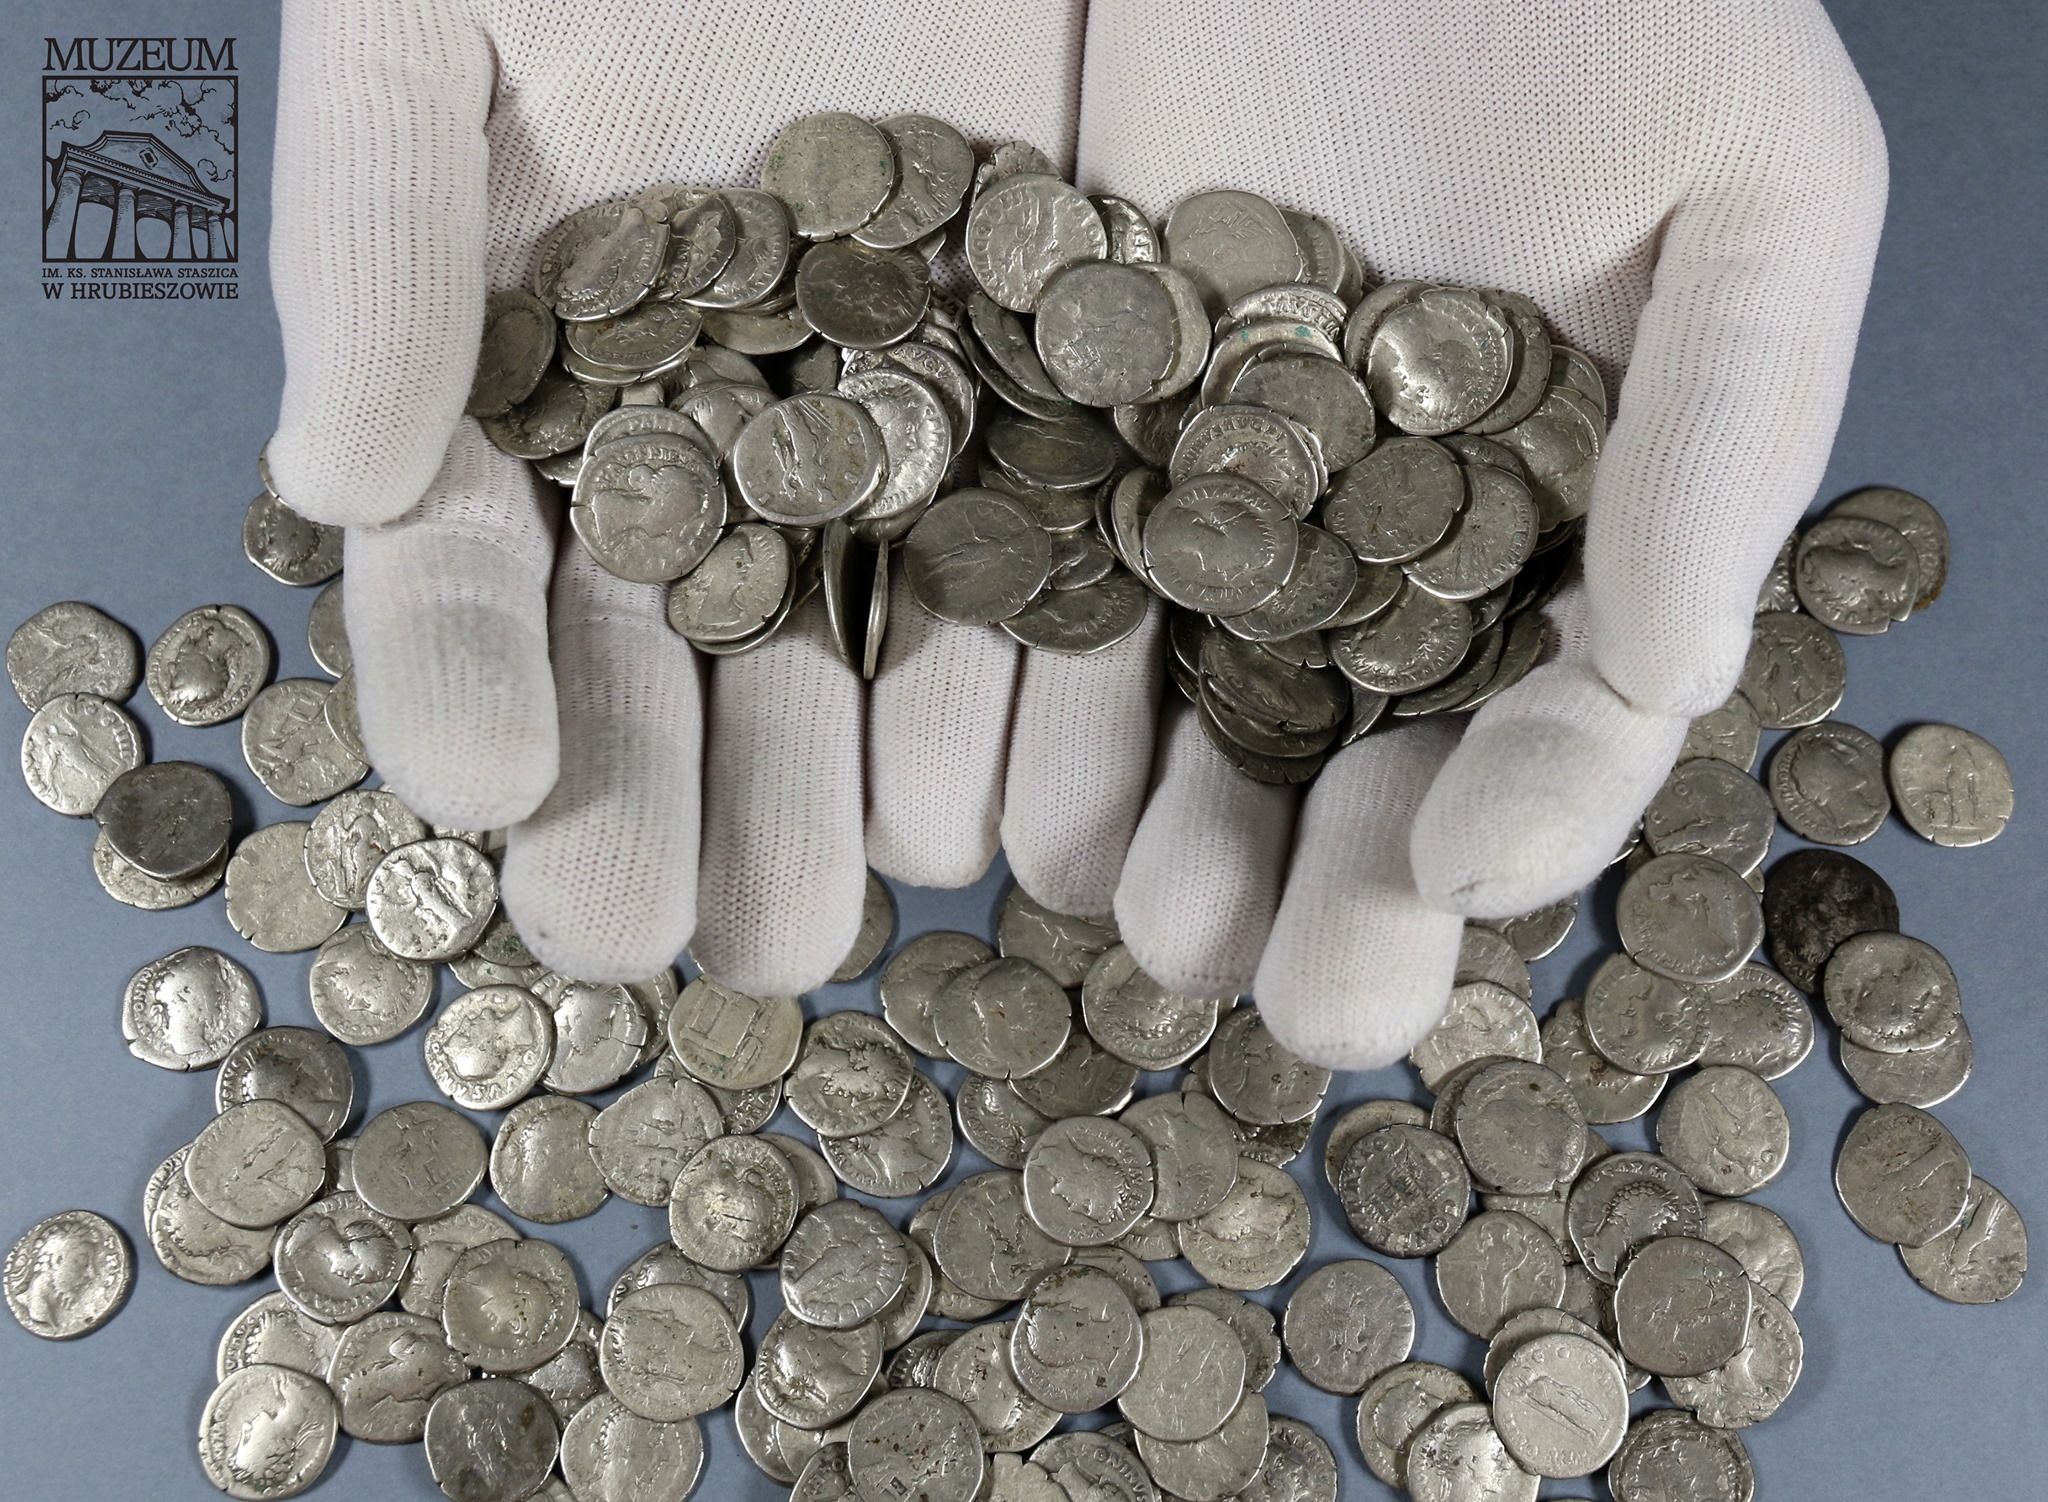 Man finds one of the largest Roman coin hoards in Poland while collecting scrap metal